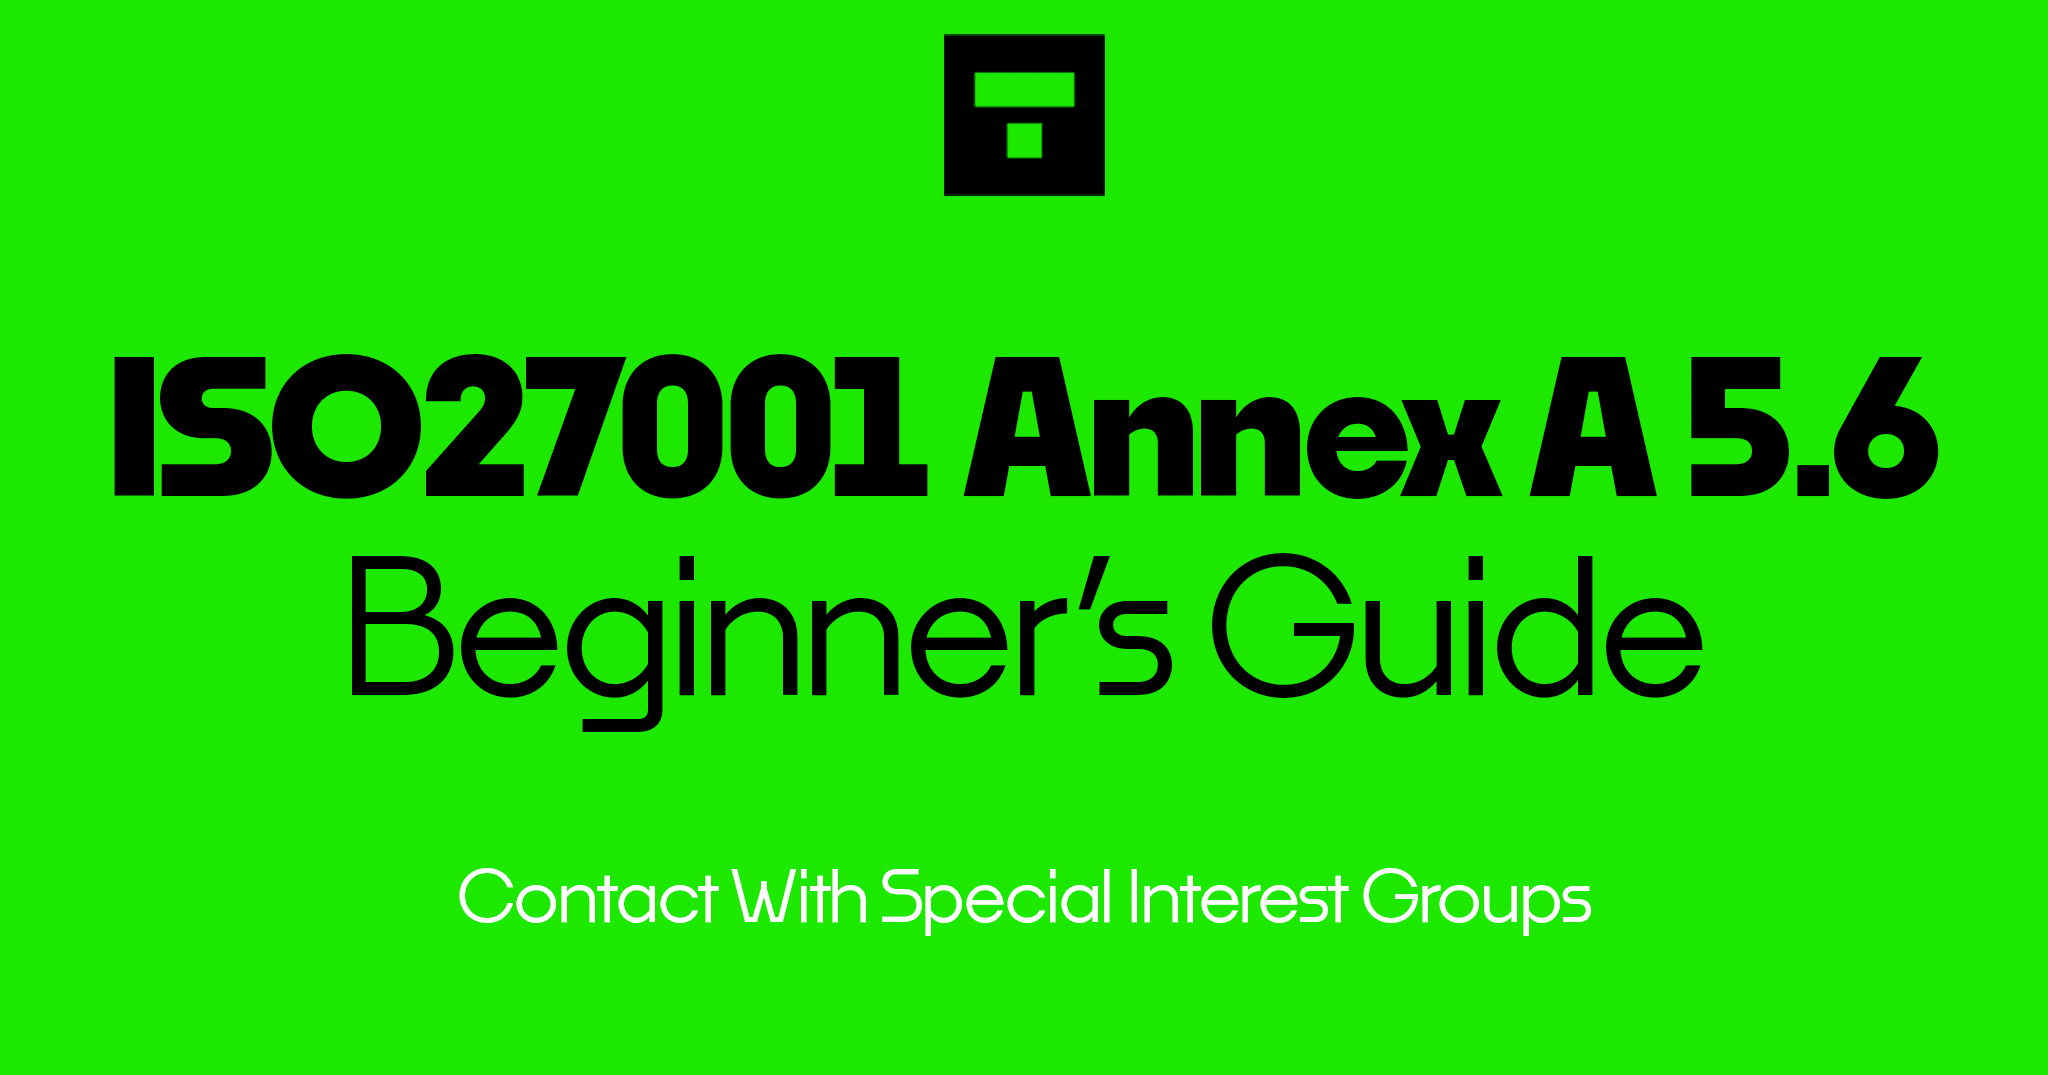 How To Implement ISO 27001 Annex A 5.6 Contact With Special Interest Groups